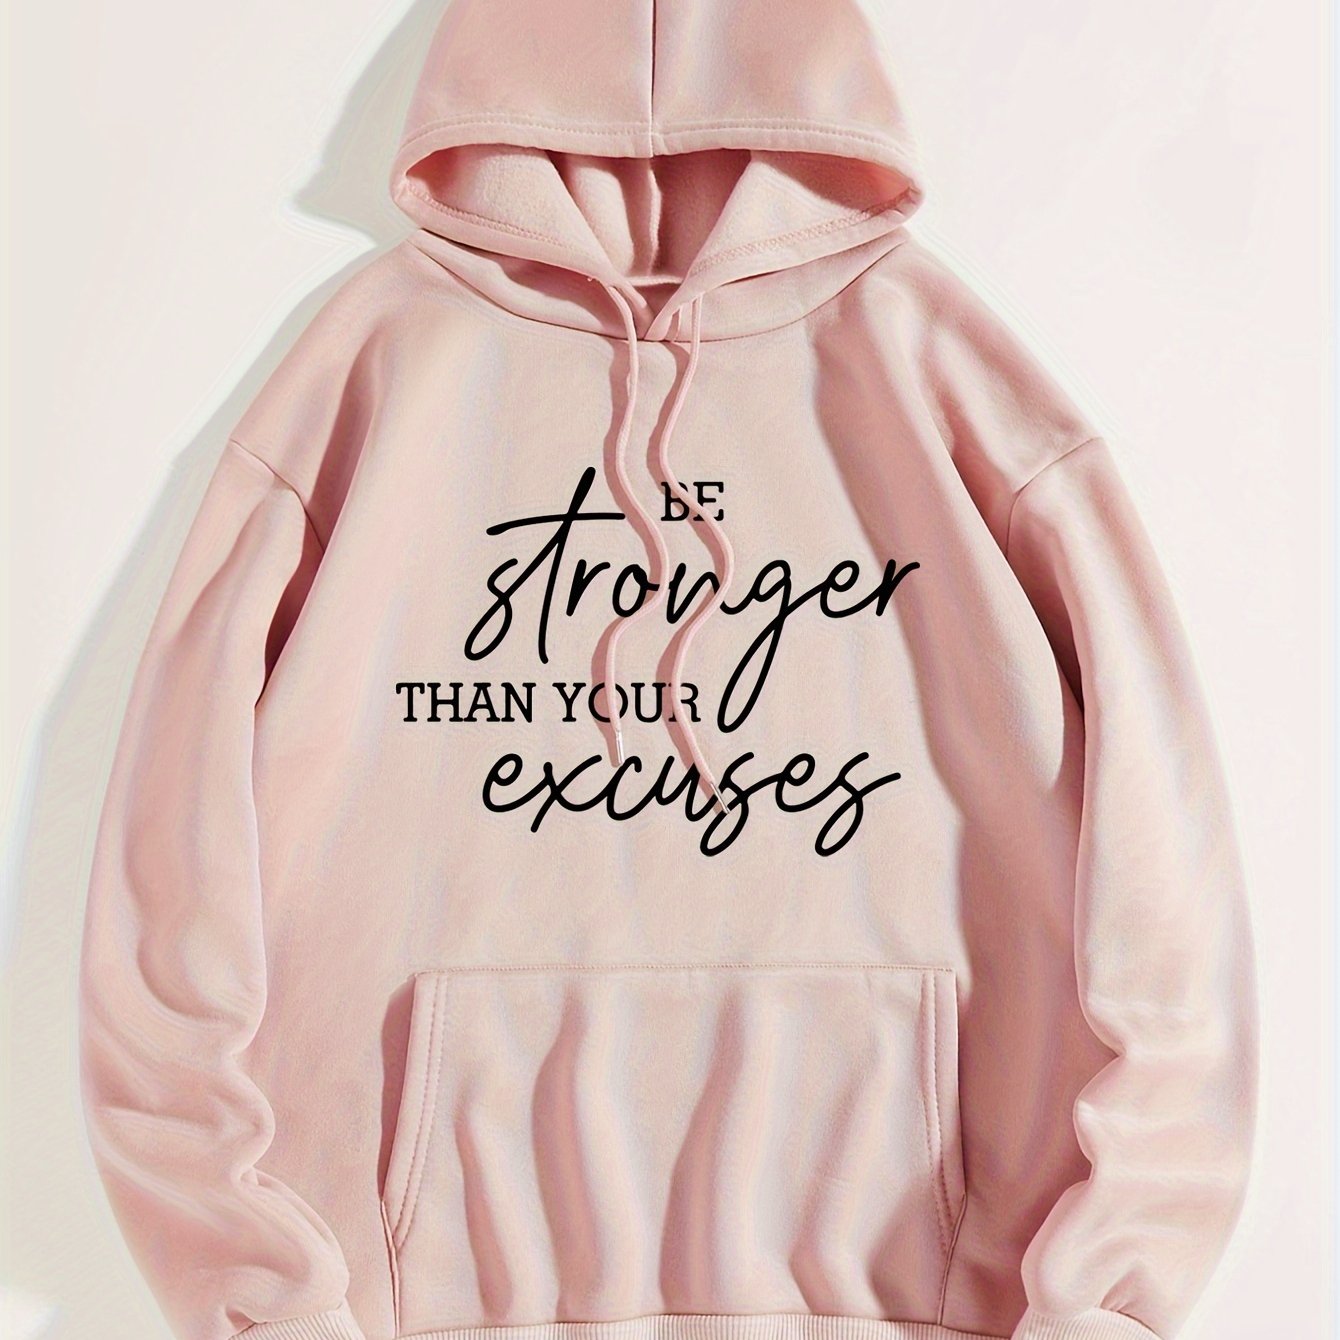 Be Stronger Than Your Excuses Plus Size Women's Christian Pullover Hooded Sweatshirt claimedbygoddesigns